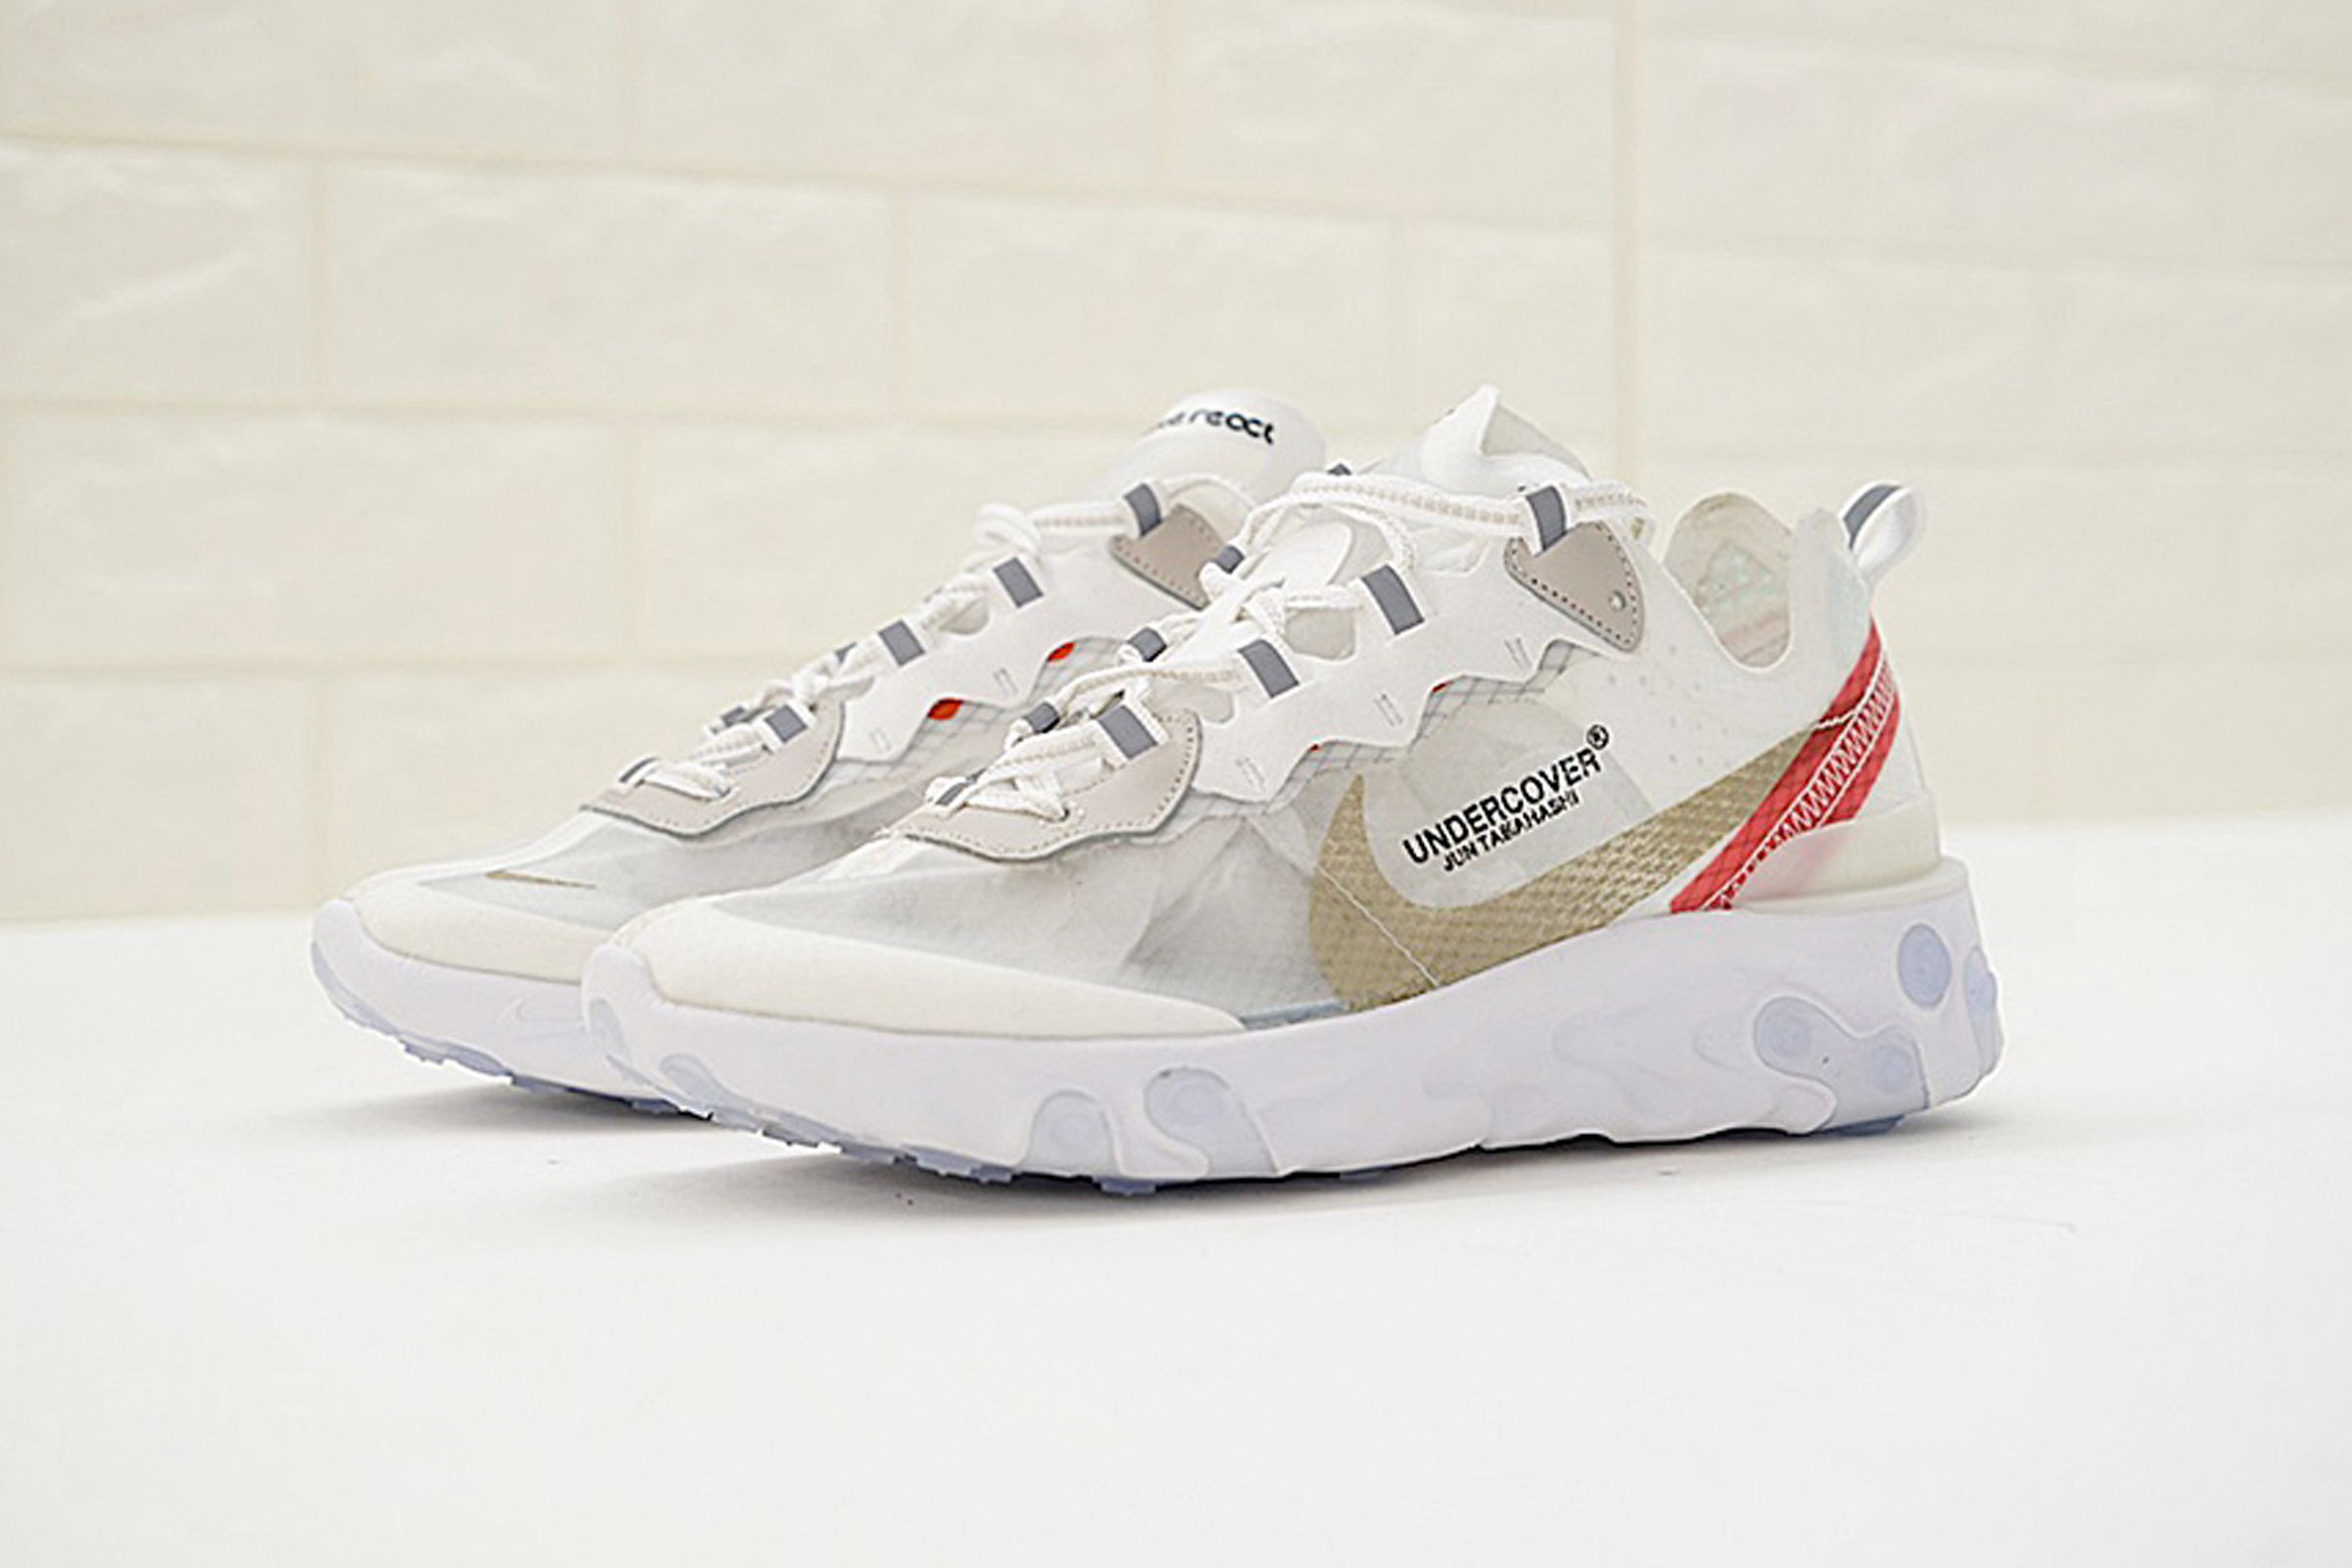 Undercover Nike Tease Colorways for the React 87 | Grailed